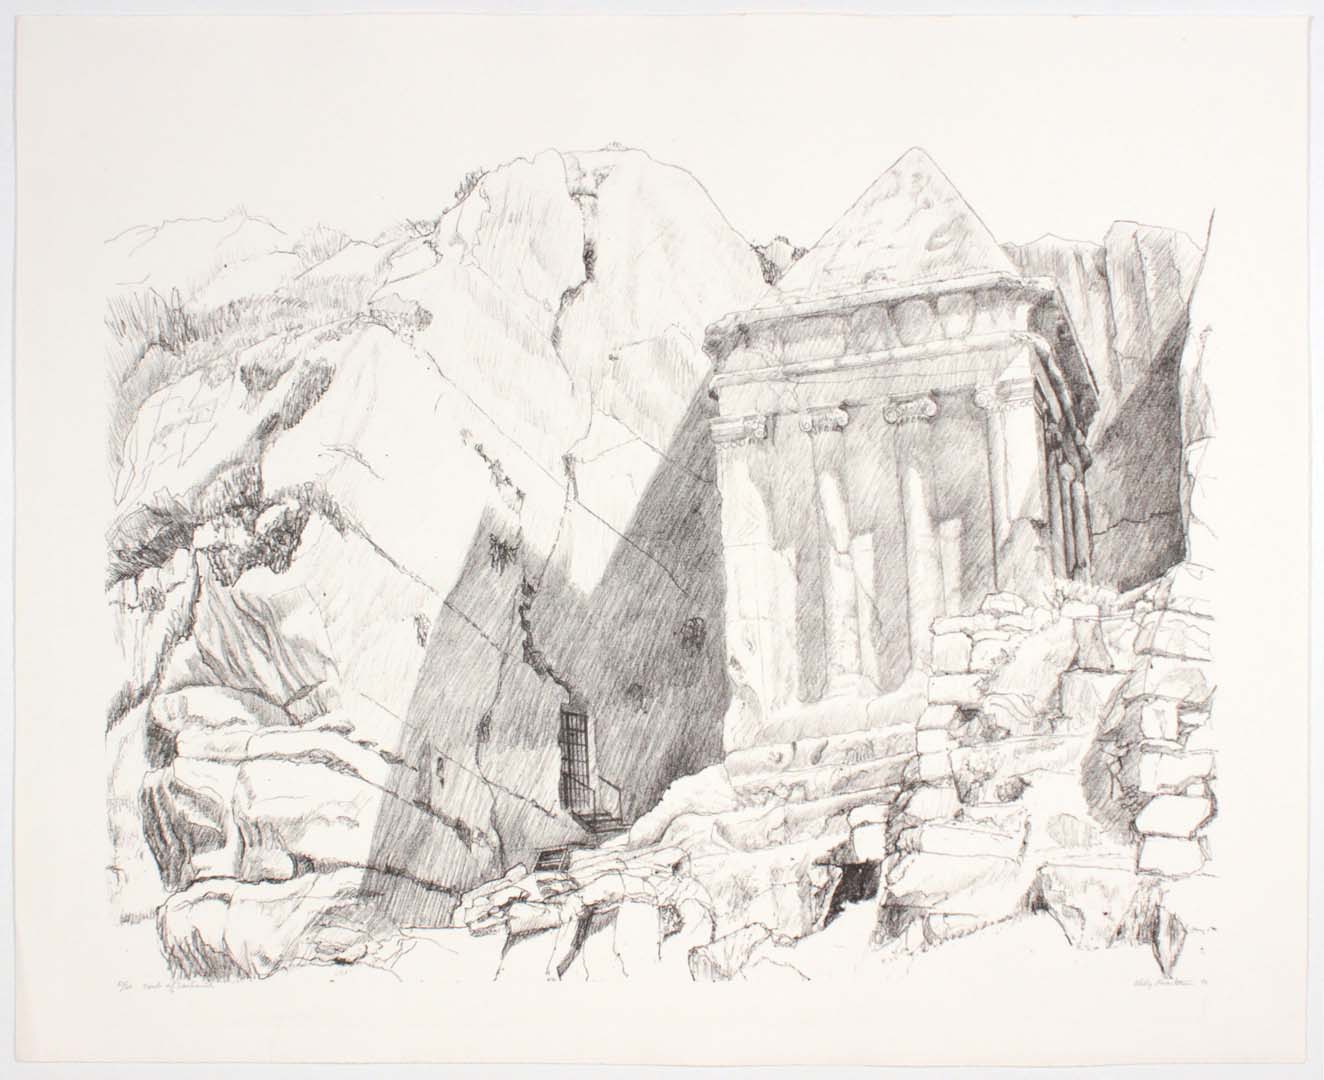 1986 Tomb of Zacharia Lithograph on Paper 29 x 36.5